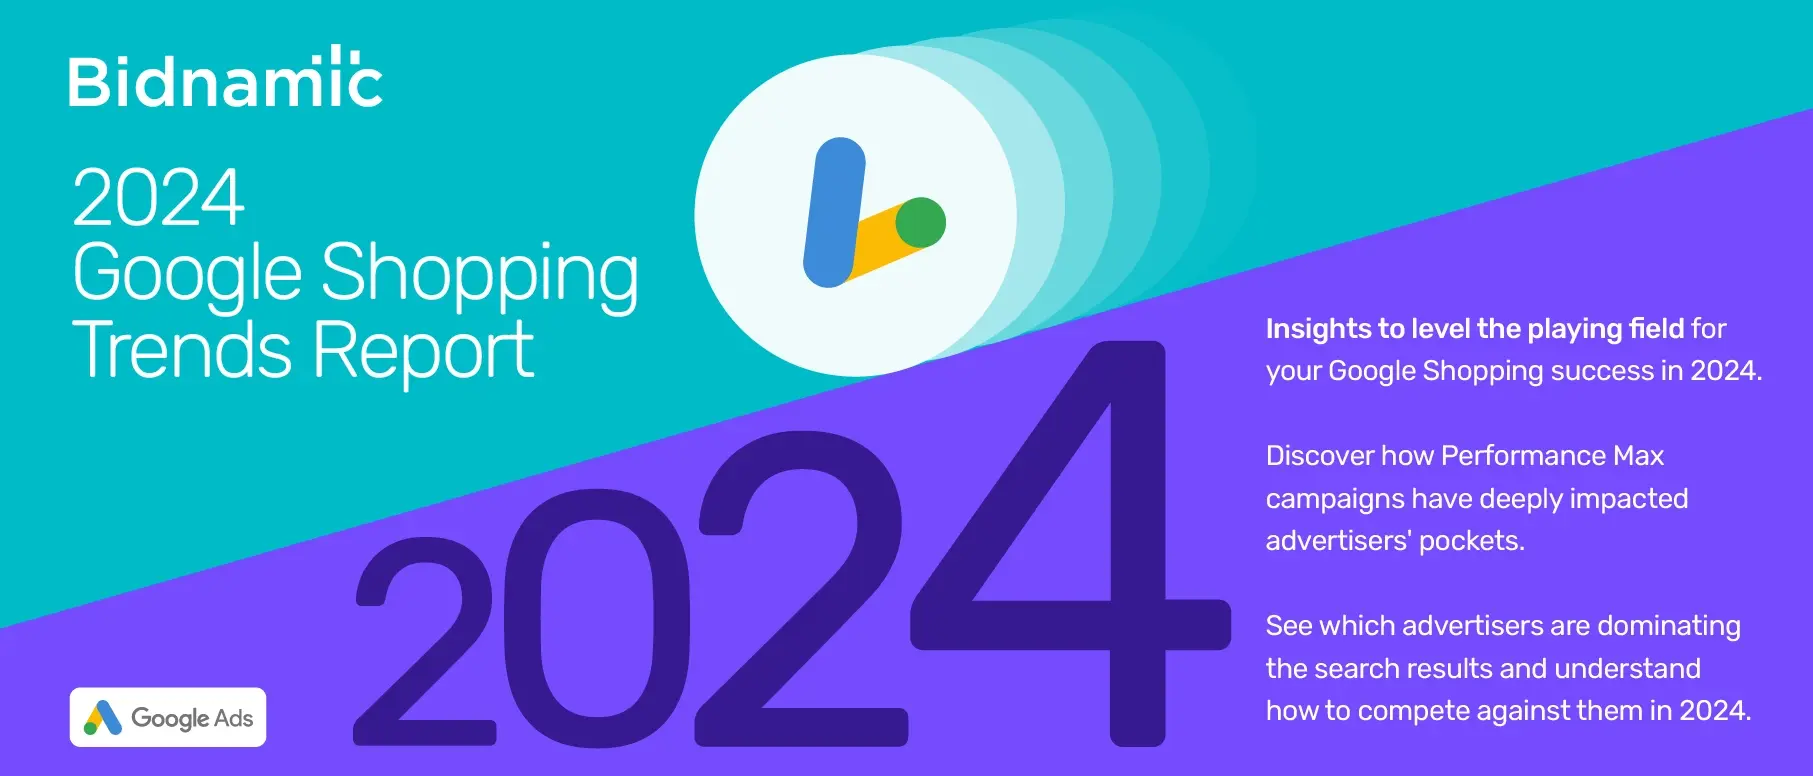 The 2024 Google Shopping Trends Report from Bidnamic